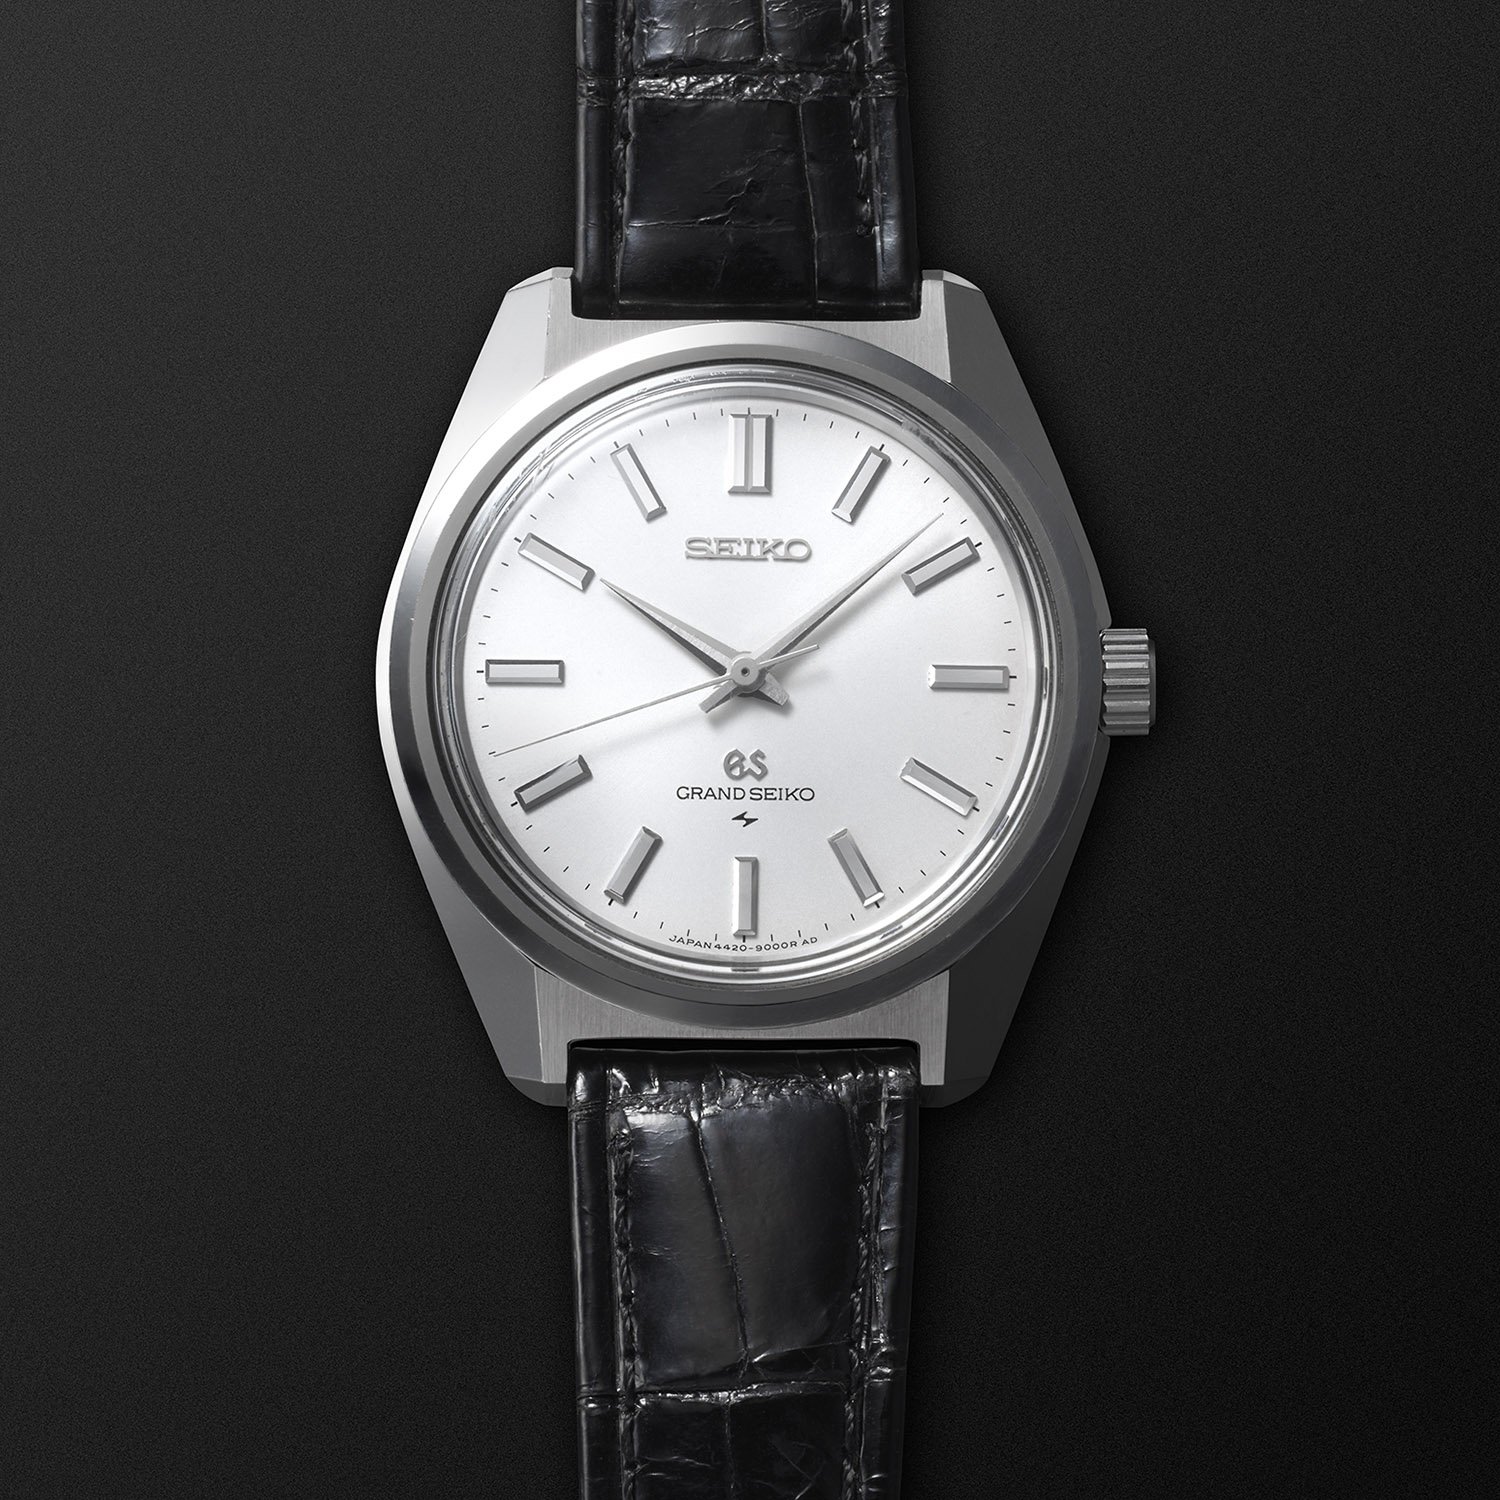 Grand Seiko Heritage Collection Hi-Beat 36000 GMT 44GS 55th Anniversary Limited Edition SBGJ255